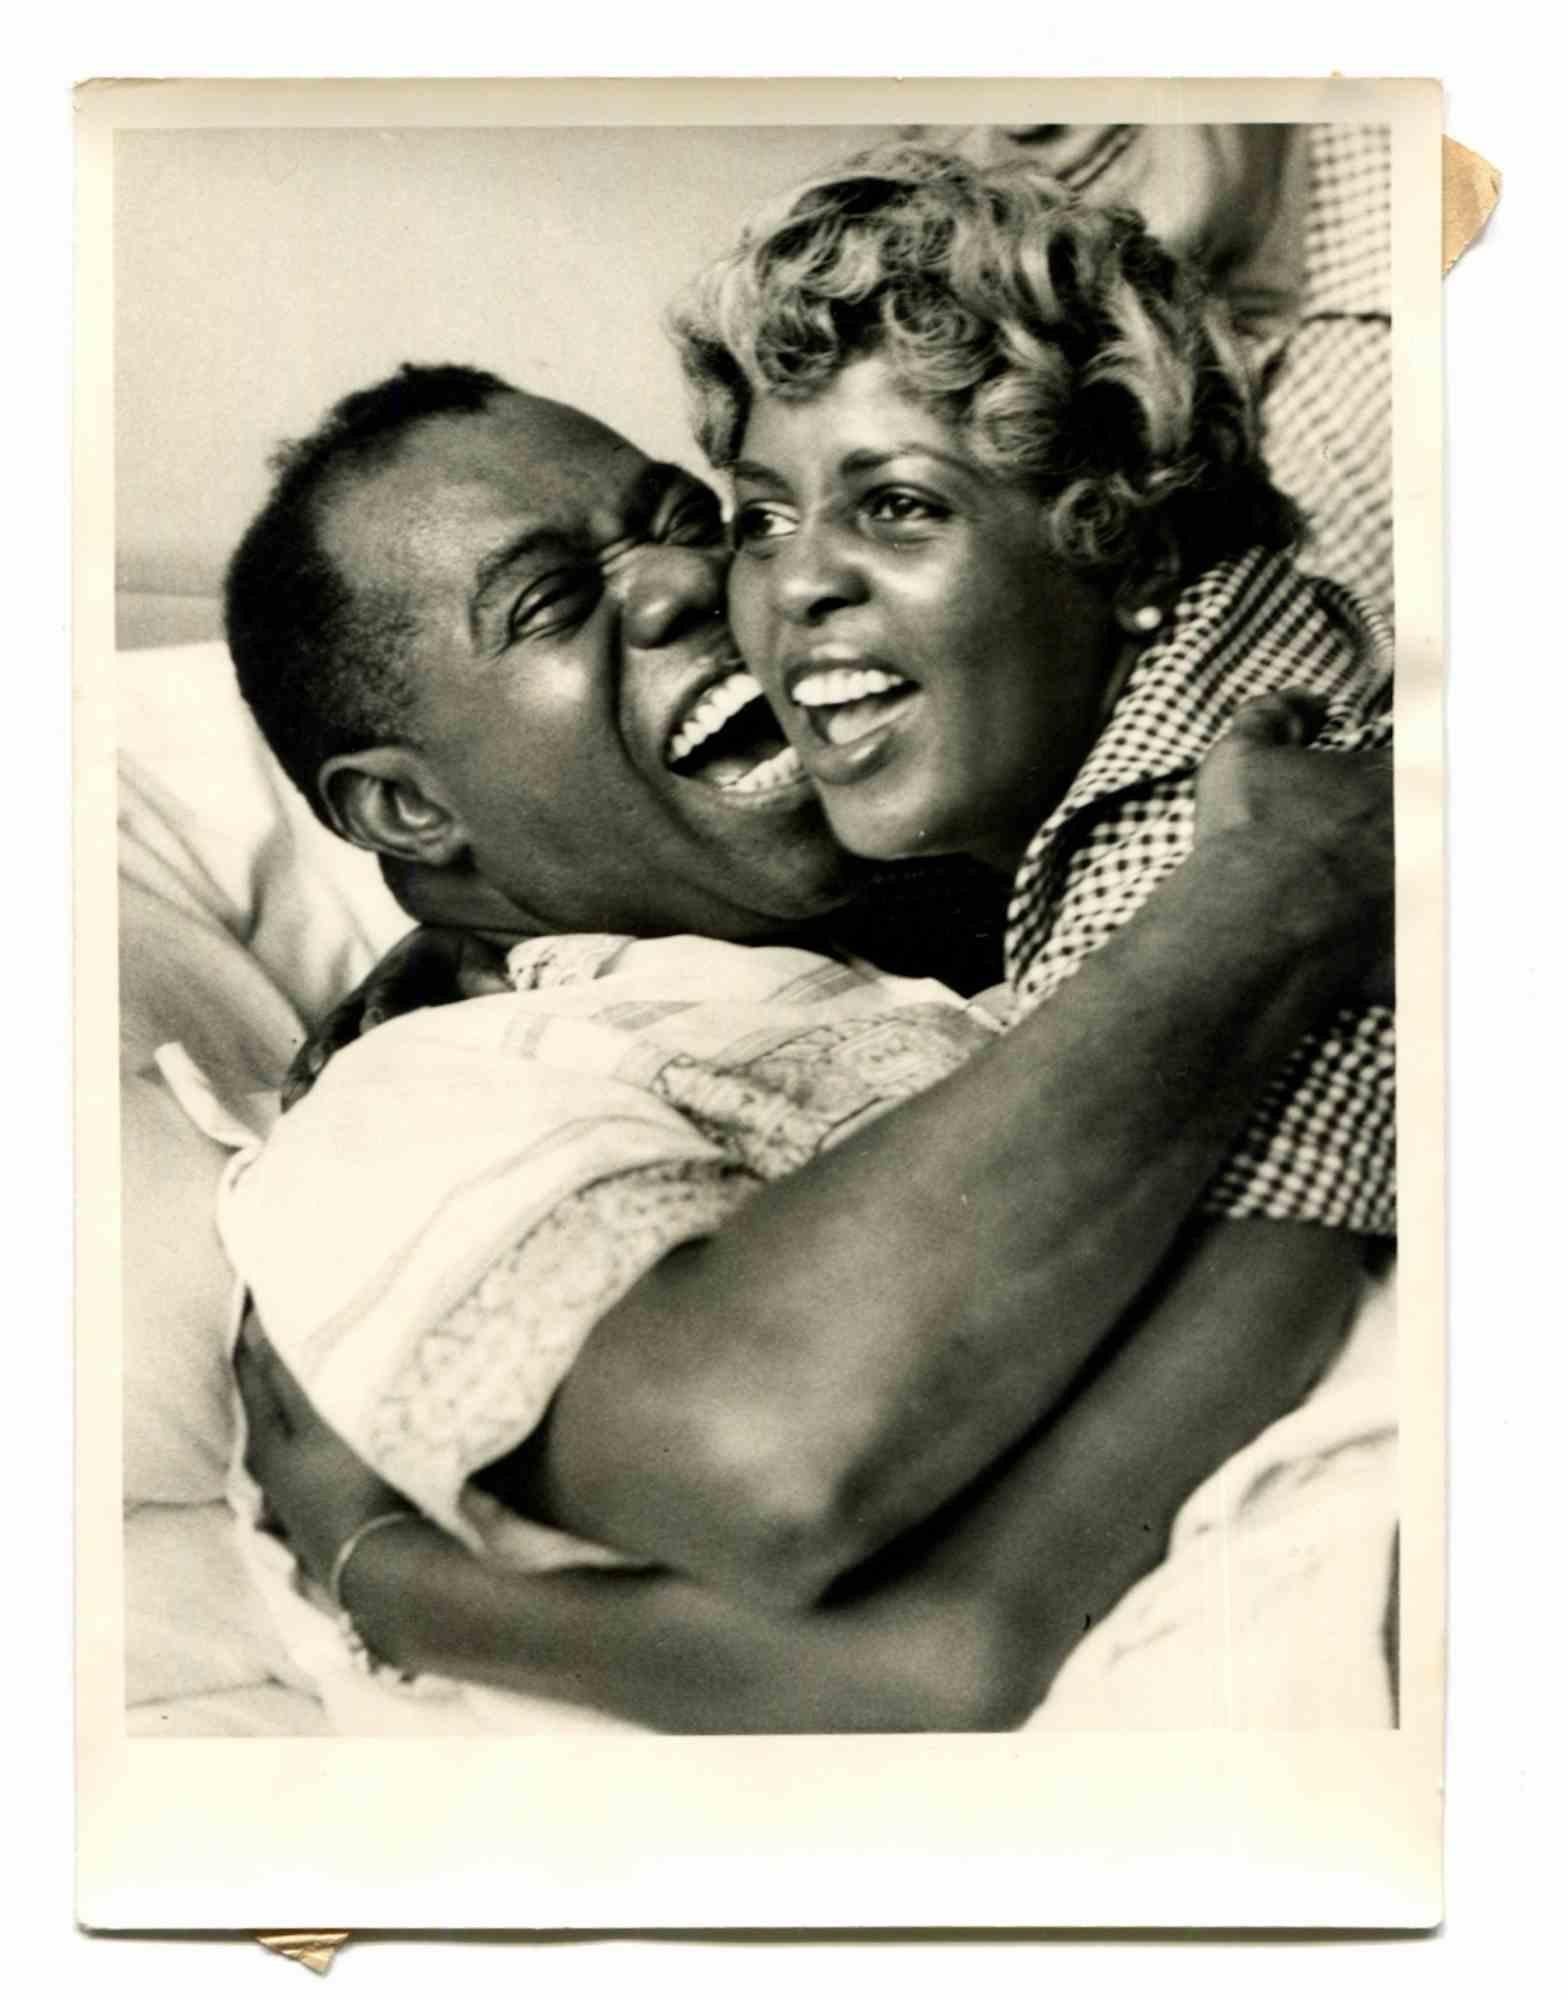 Unknown Portrait Photograph - Louis Armstrong and his Wife - Historical Photo - 1960s